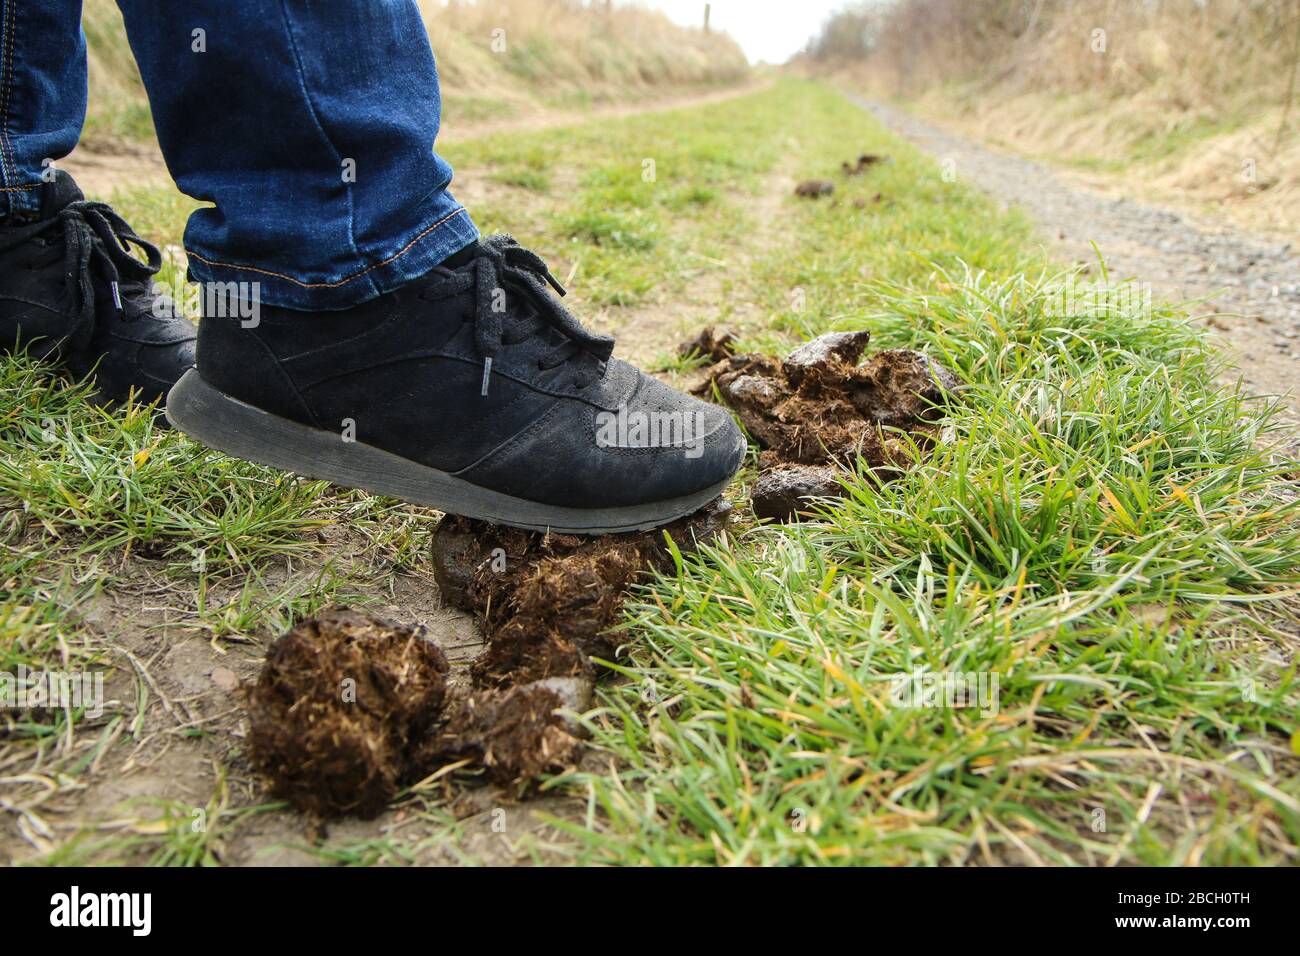 The detail of the foot stepping into the horse excrement while walking in the nature. Symbol for bad luck. Stock Photo